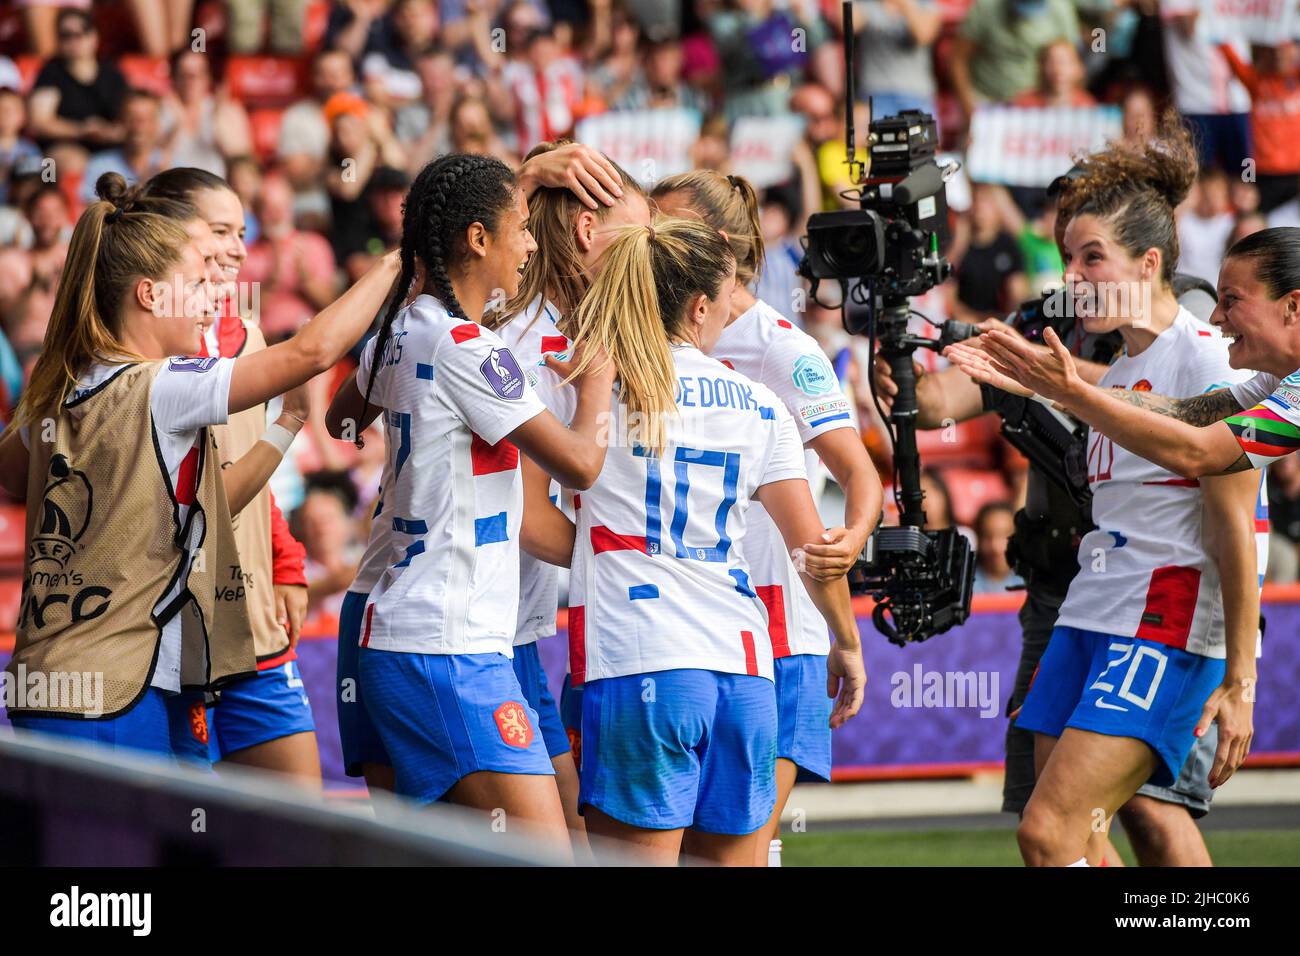 SHEFFIELD - Romee Leuchter of Holland women celebrate the 1-2 during the UEFA Women's EURO England 2022 match between Switzerland and the Netherlands at Bramall Lane stadium on July 17, 2022 in Sheffield, United Kingdom. ANP GERRIT VAN COLOGNE Stock Photo